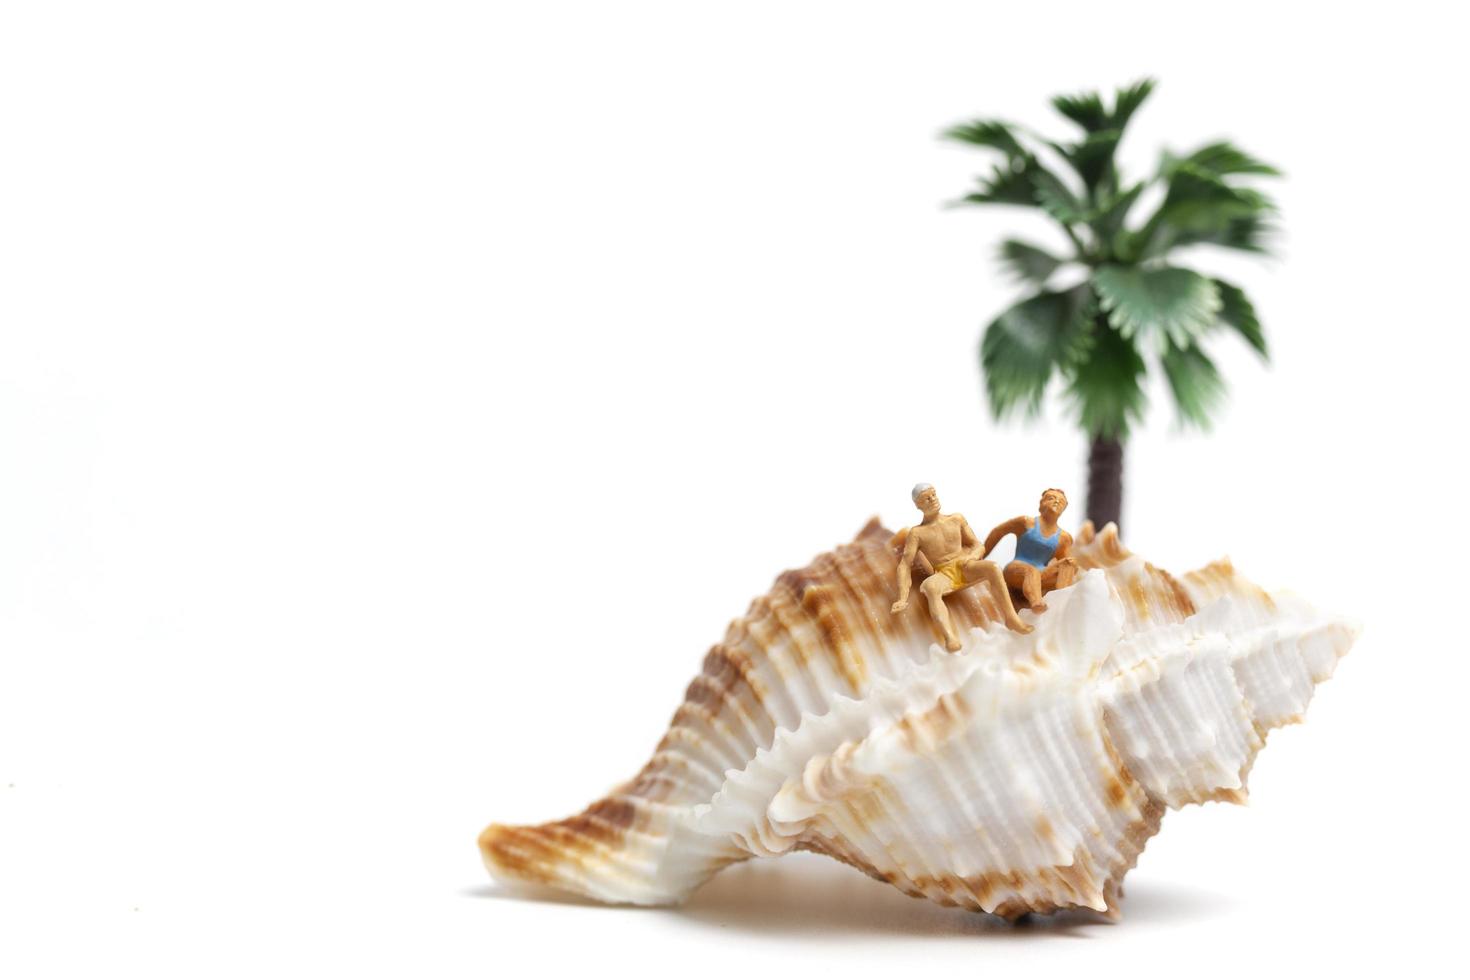 Miniature people wearing swimsuits relaxing on a seashell on a white background photo